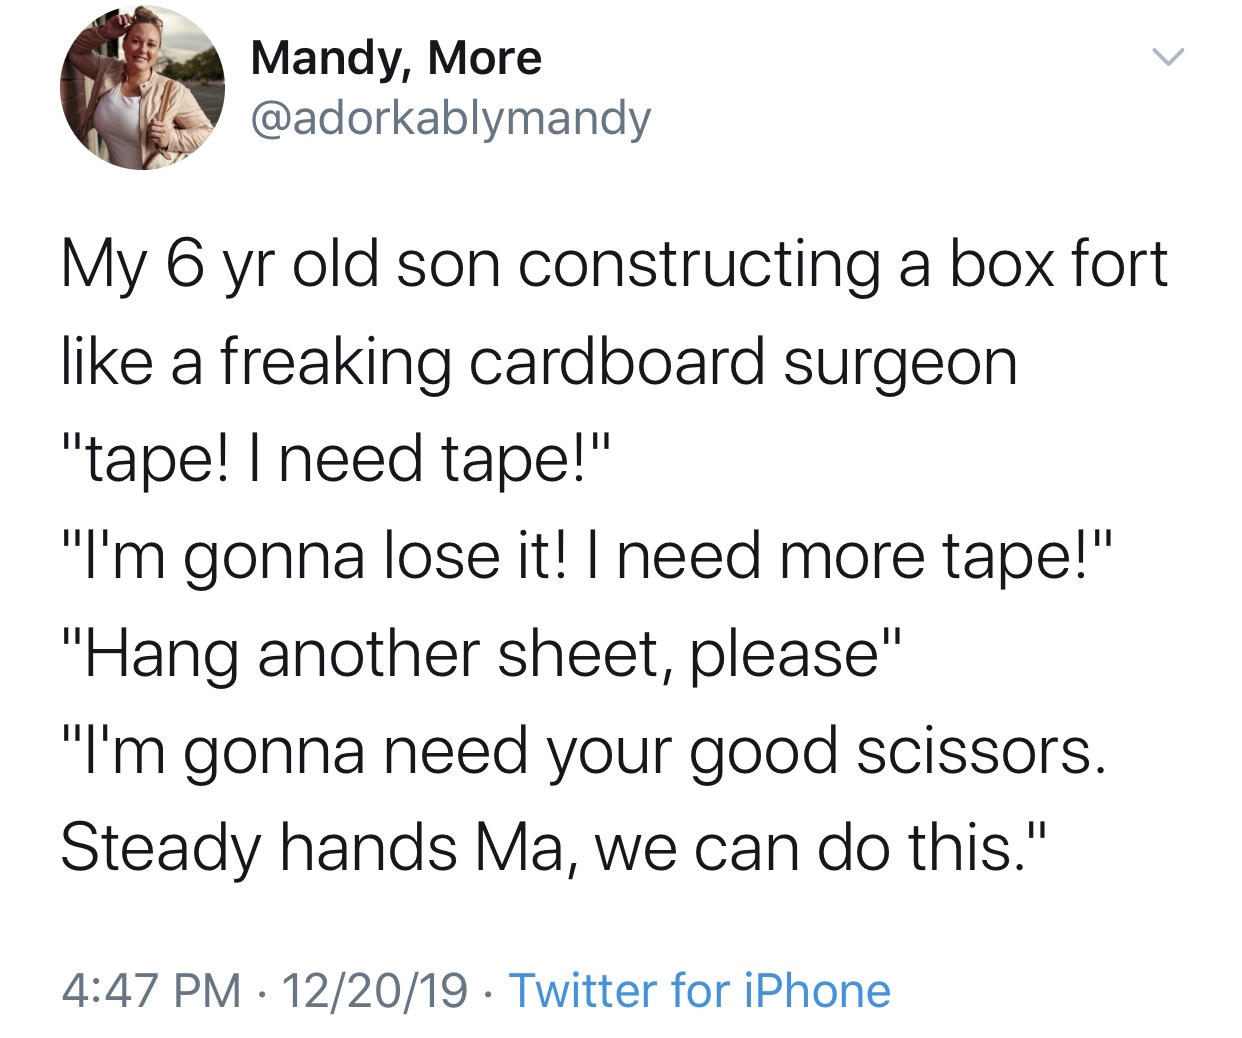 angle - Mandy, More My 6 yr old son constructing a box fort a freaking cardboard surgeon "tape! I need tape!" "I'm gonna lose it! I need more tape!" "Hang another sheet, please" "I'm gonna need your good scissors. Steady hands Ma, we can do this." 122019 